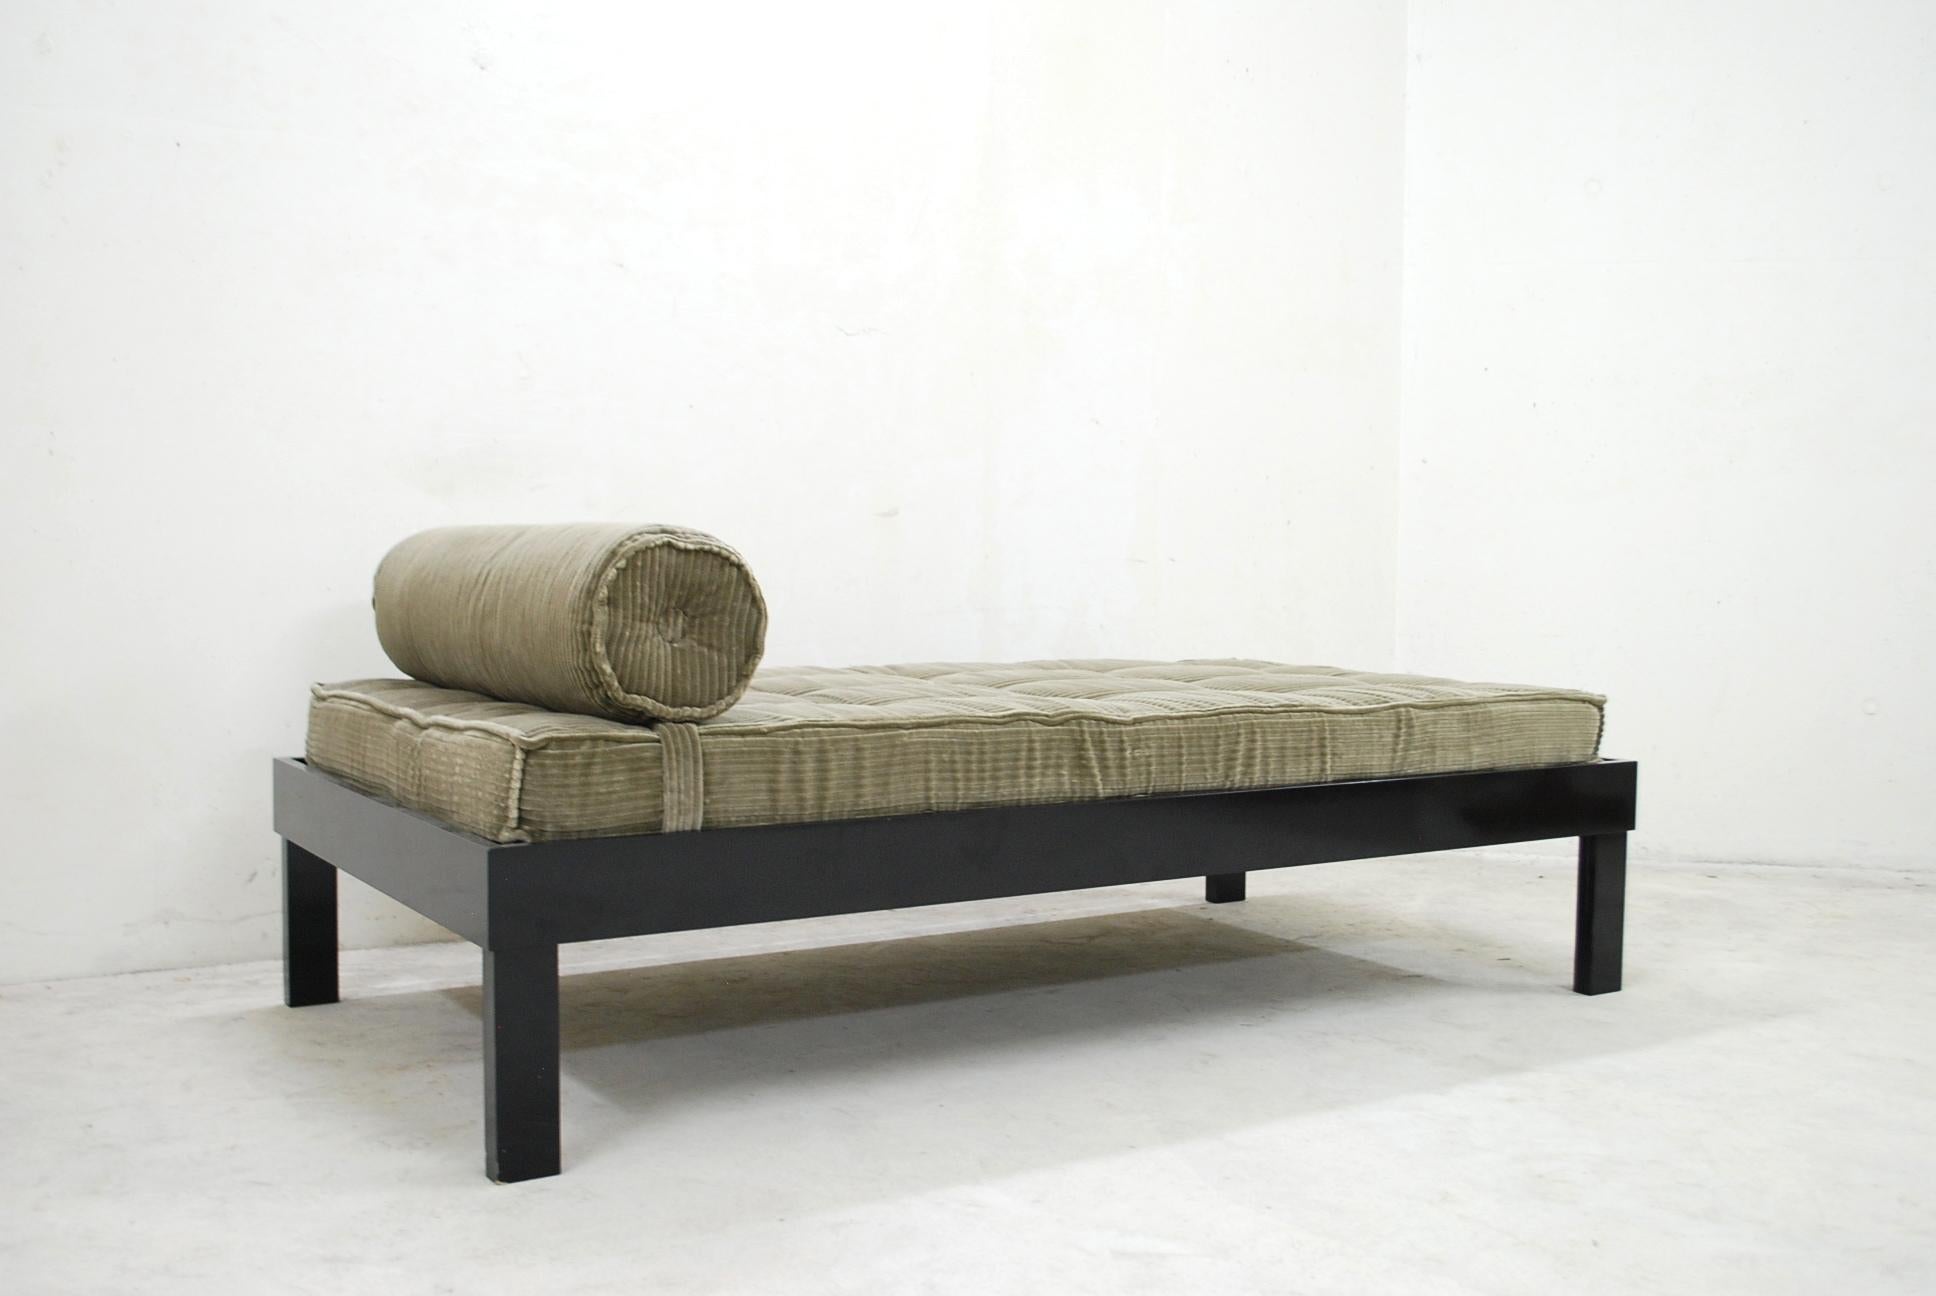 English Modern Daybed Sofa by Burburry Prorsum For Sale